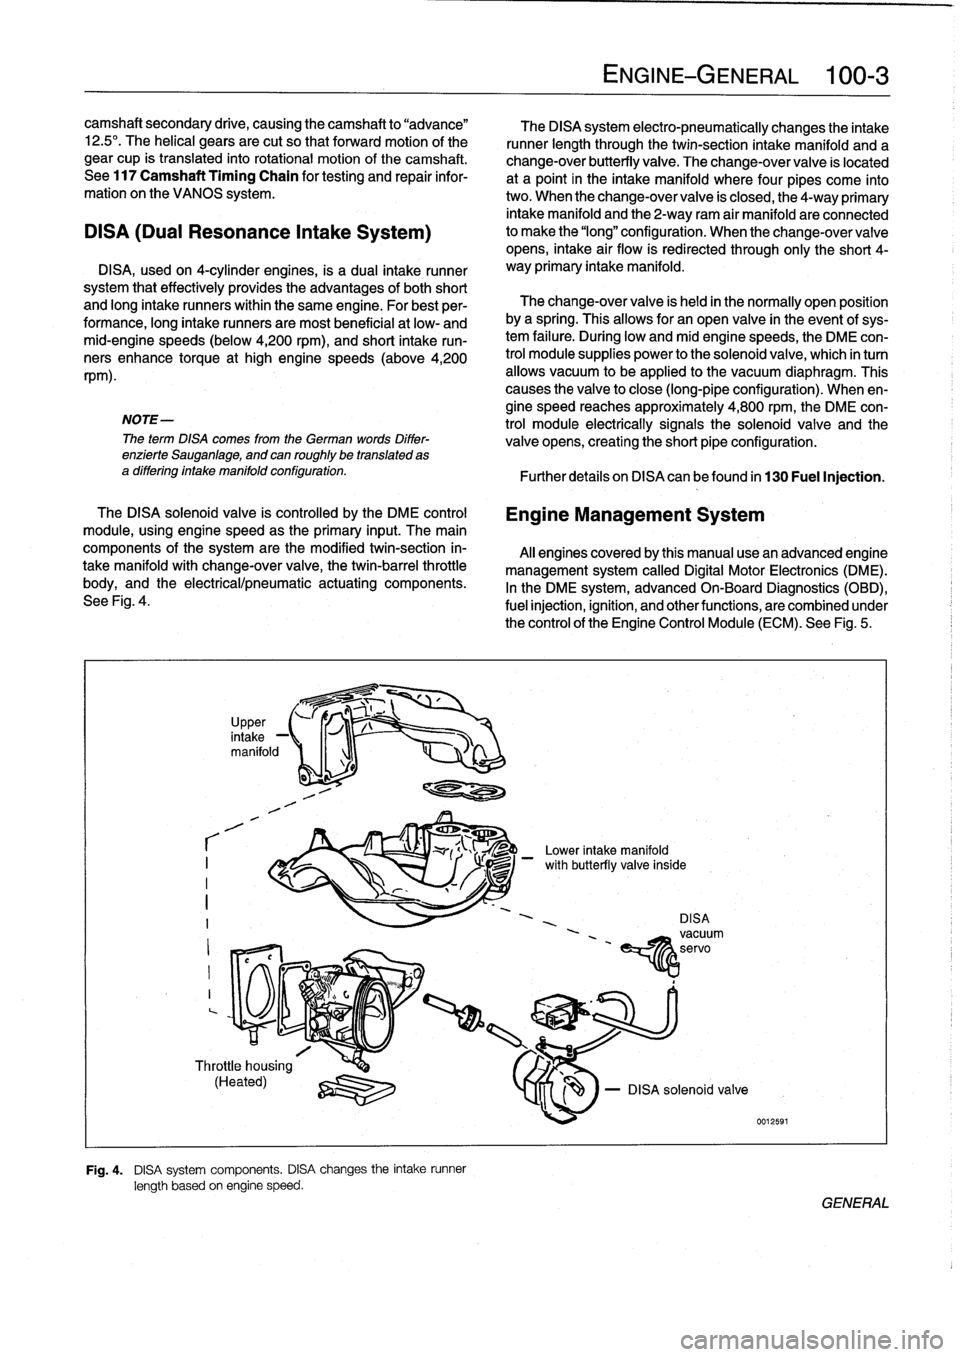 BMW M3 1998 E36 Workshop Manual camshaft
secondary
drive,
causing
thecamshaft
to
"advance"

12
.5°
.
The
helical
gears
are
cut
so
that
forward
motion
of
the

gear
cup
is
transiated
into
rotational
motion
of
the
camshaft
.

See
117
